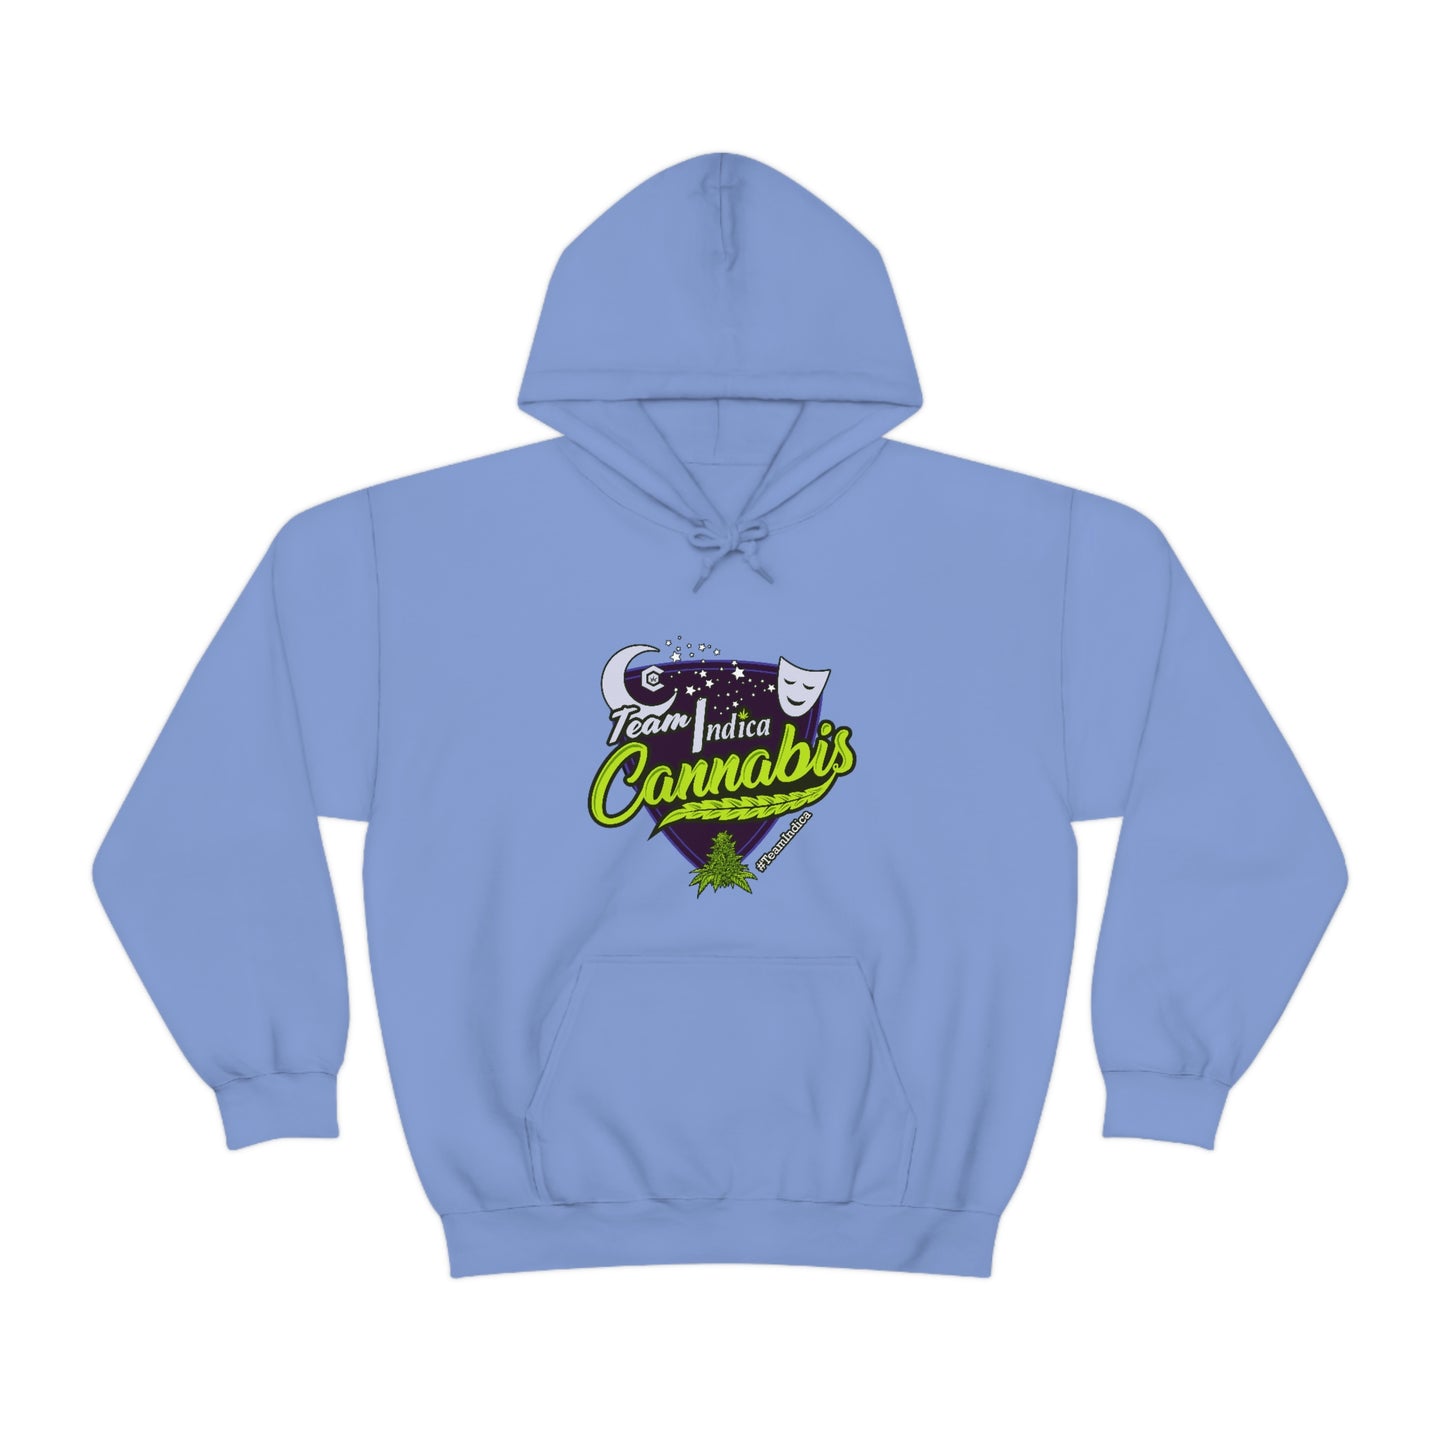 a blue Team Indica Cannabis Pullover with a purple and green logo on it.